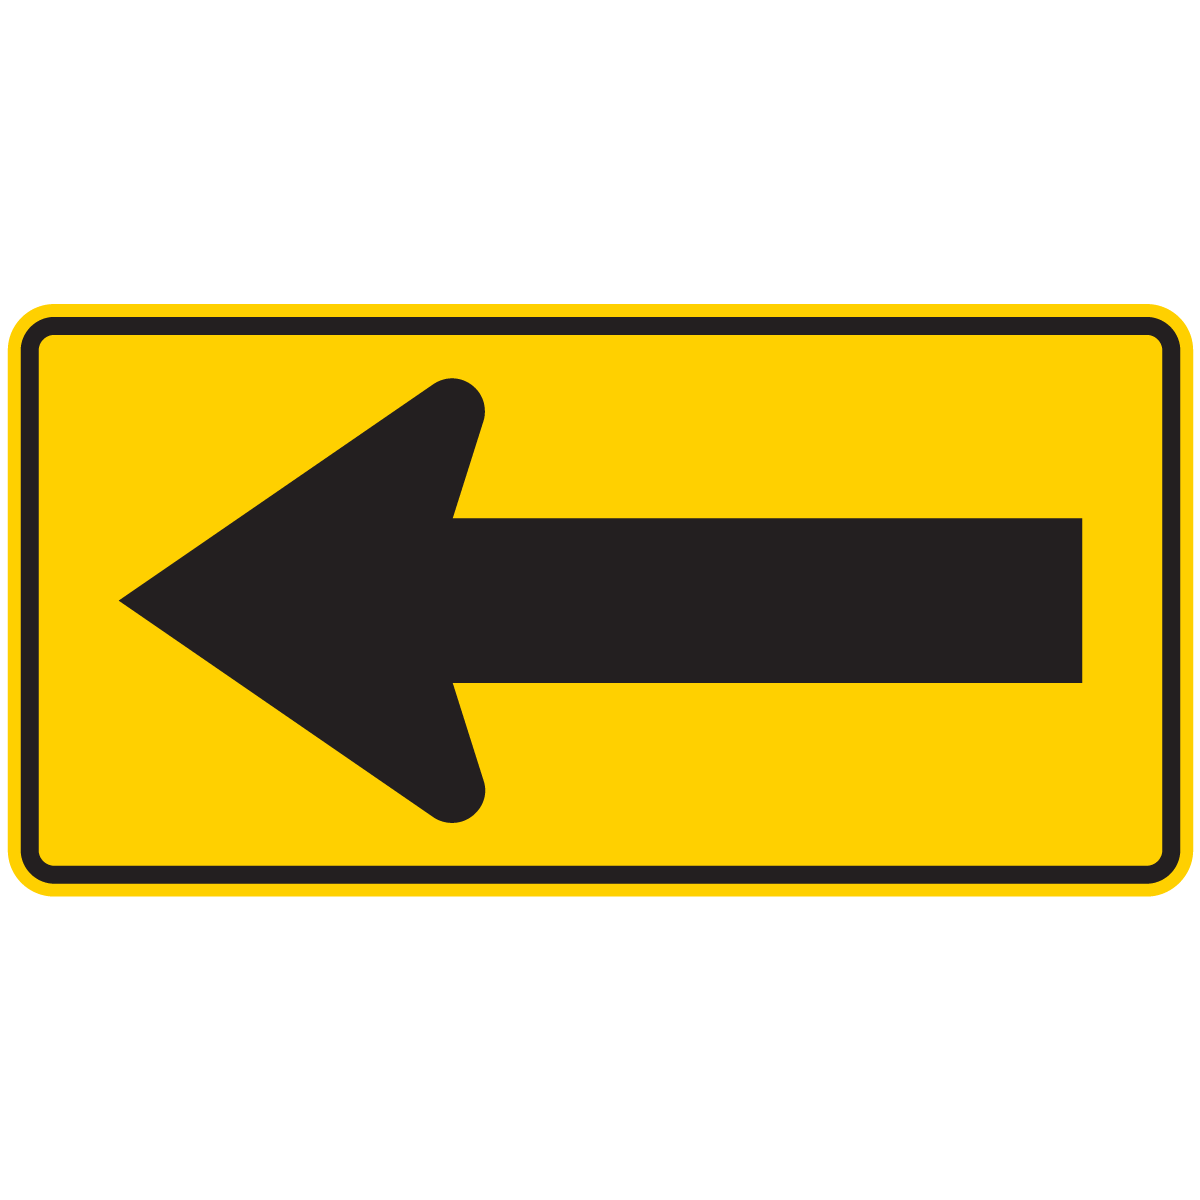 W1-6 One Direction Large Arrow (Left or Right)